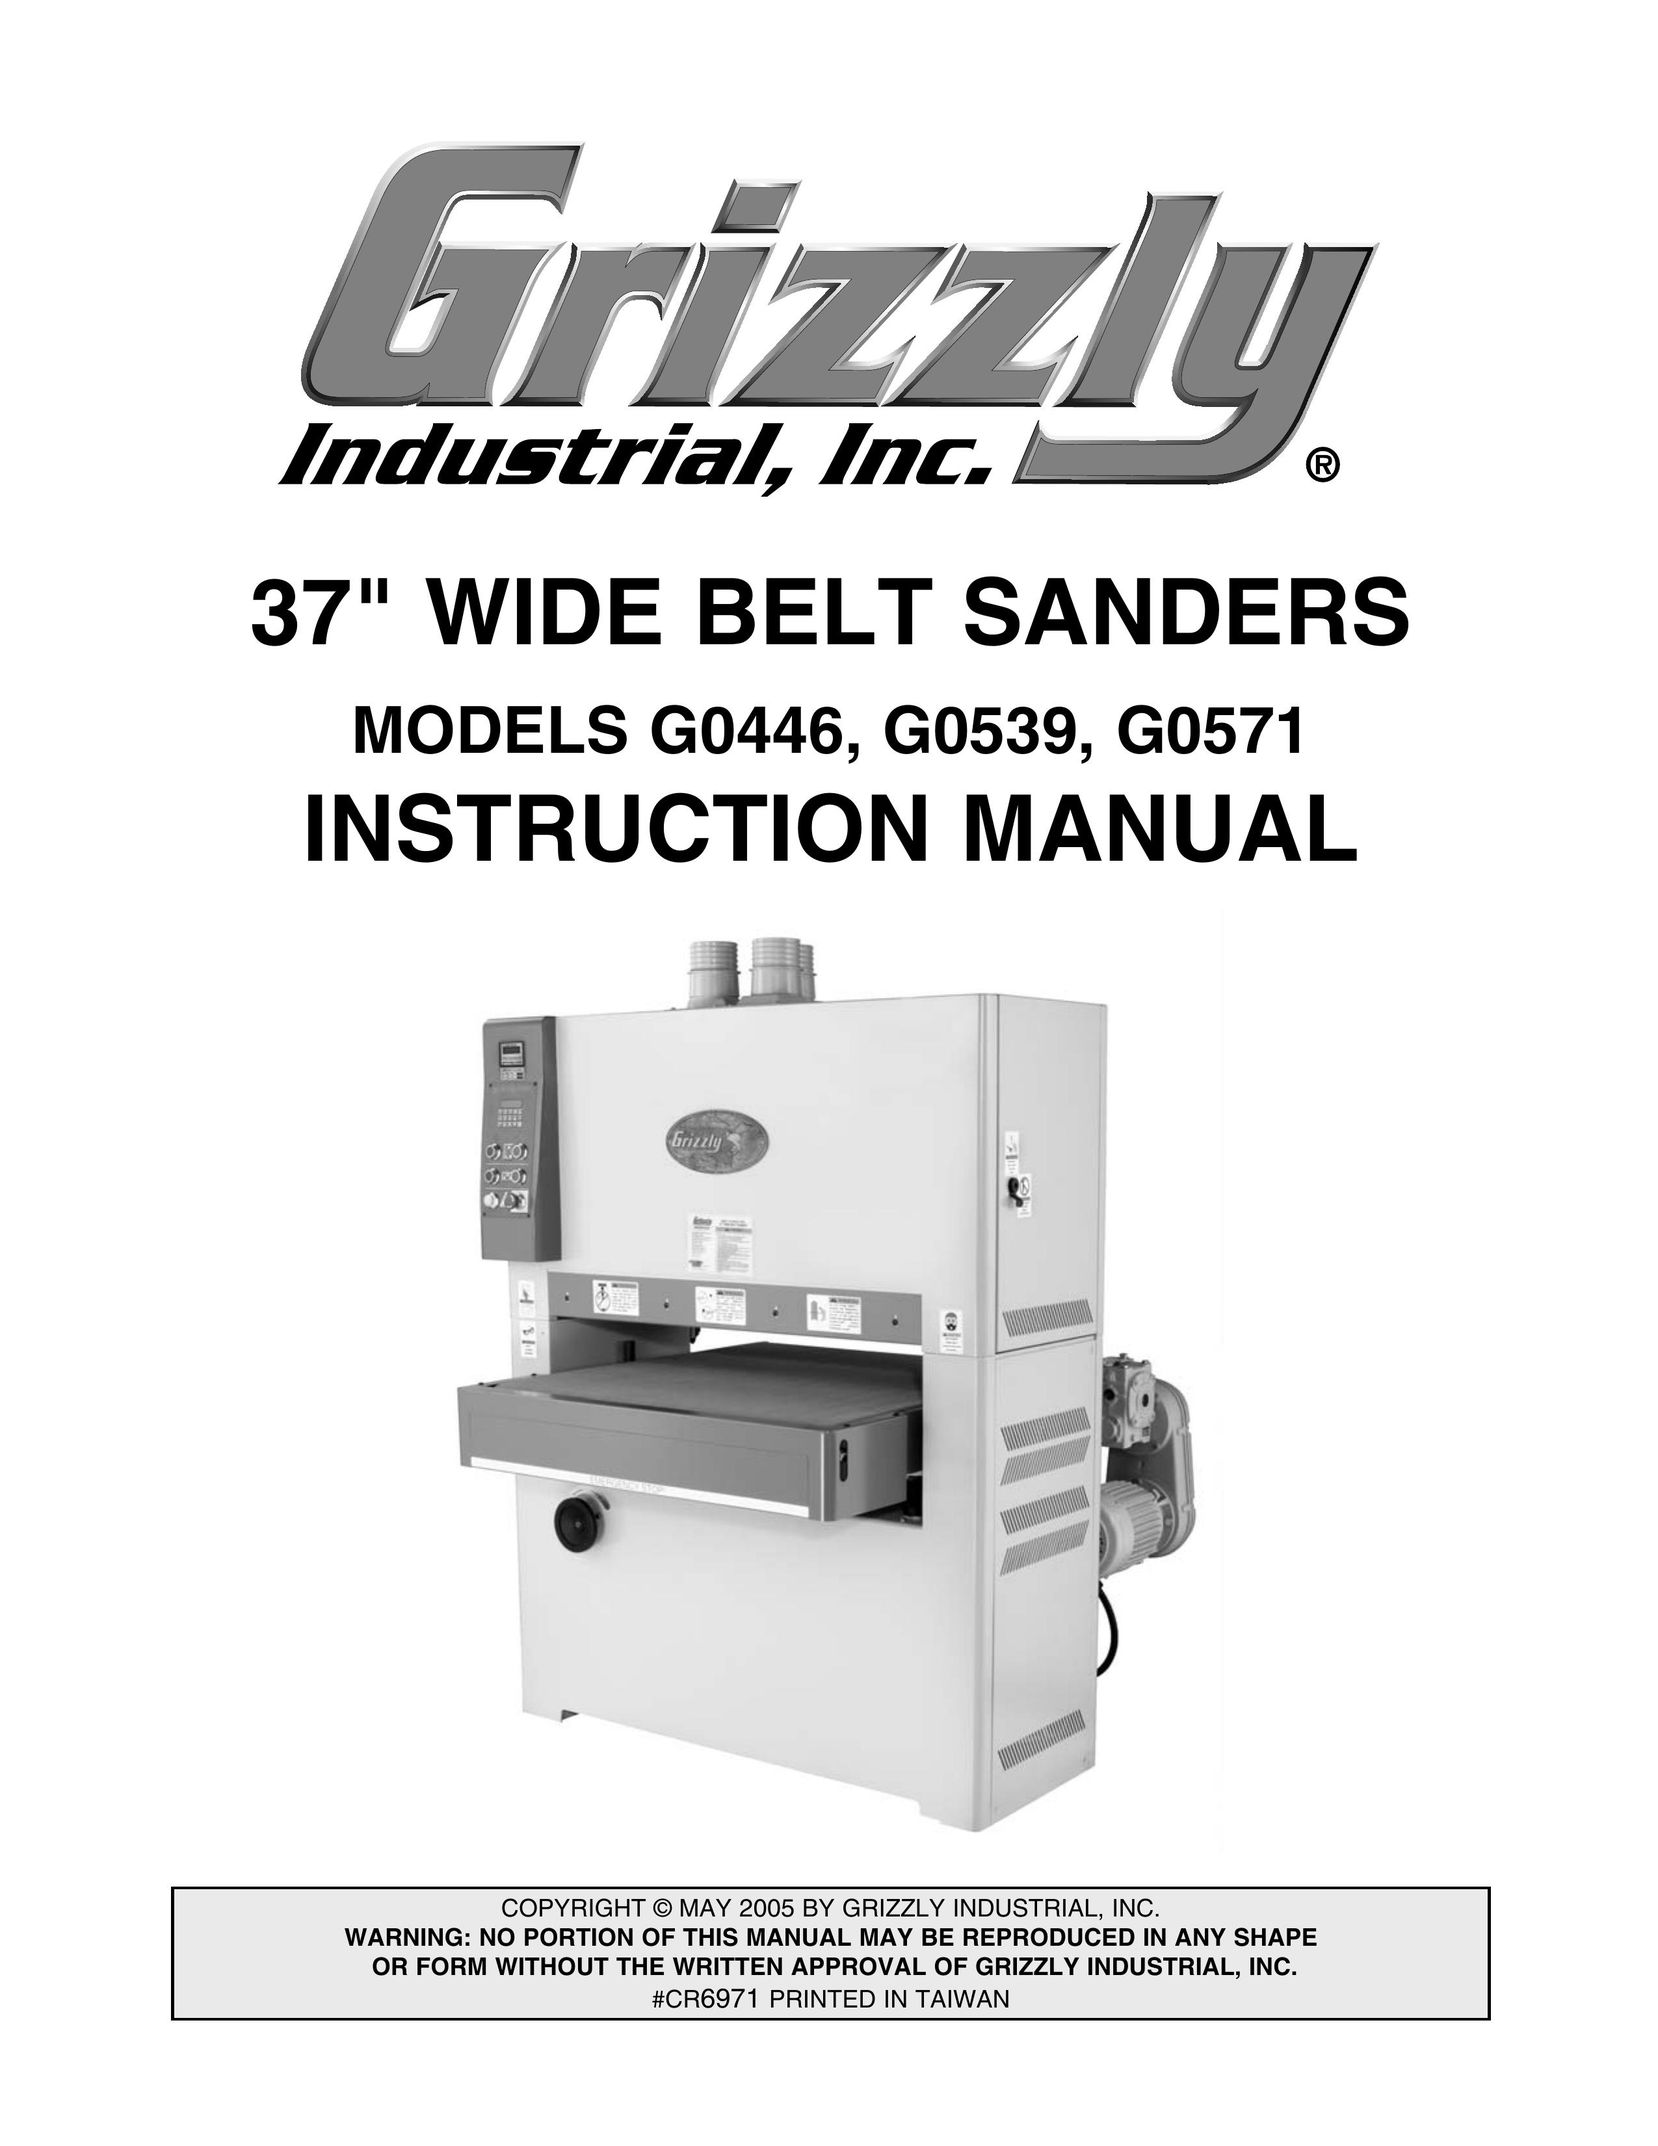 Grizzly G0446 Sander User Manual